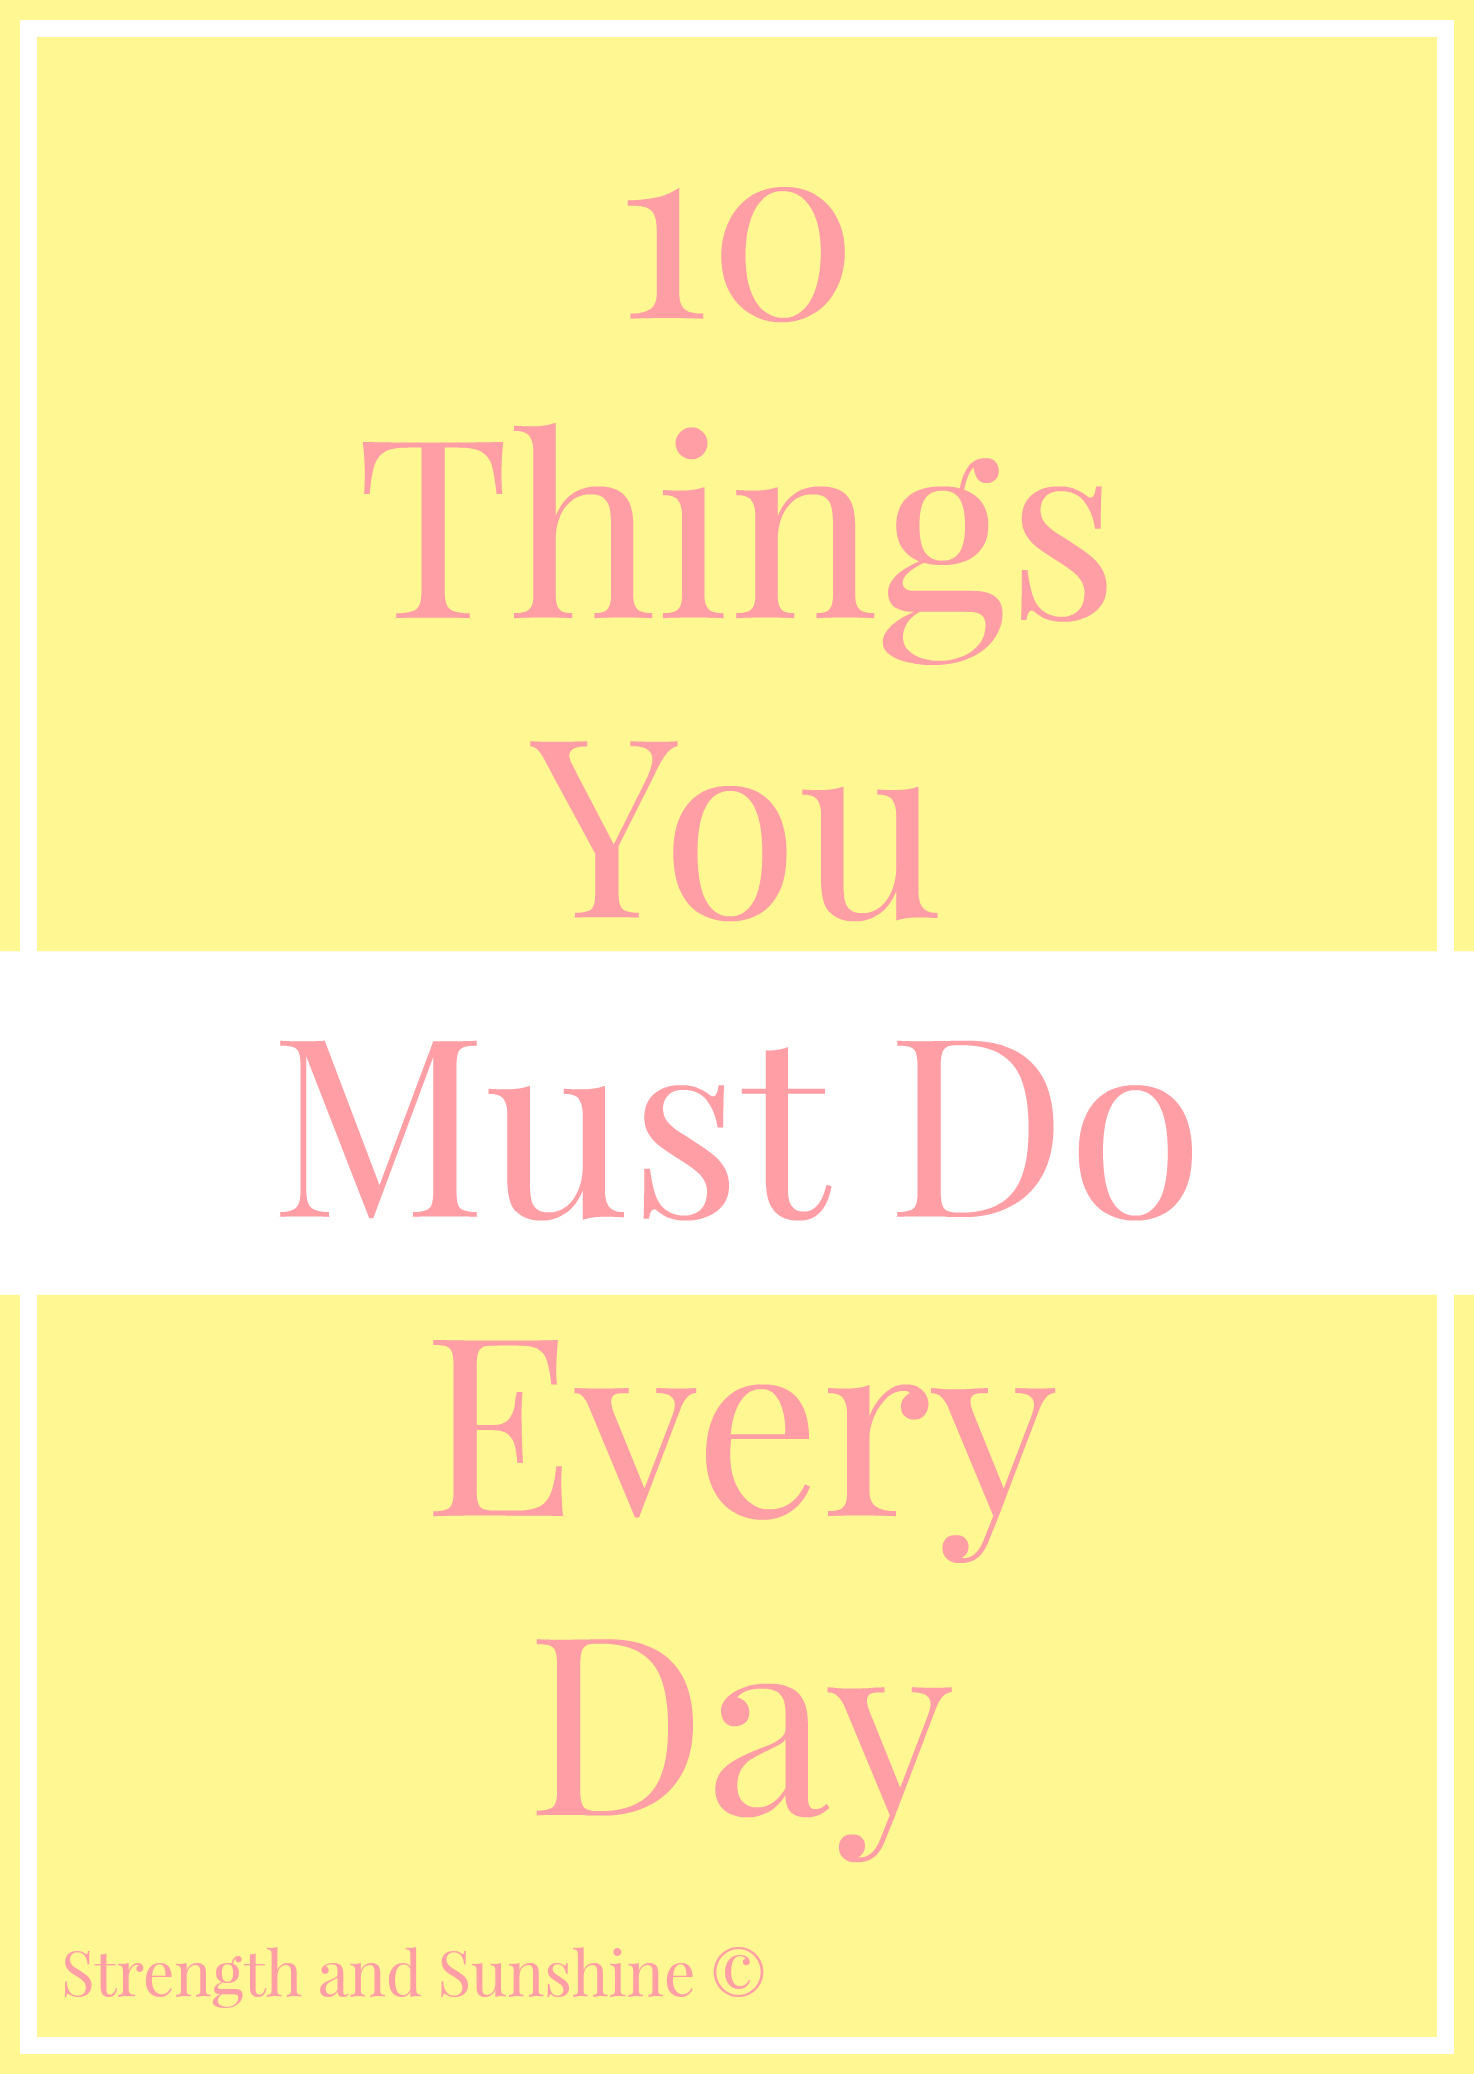 10 Things You Must Do Every Day | Strength and Sunshine @RebeccaGF666 #motivation